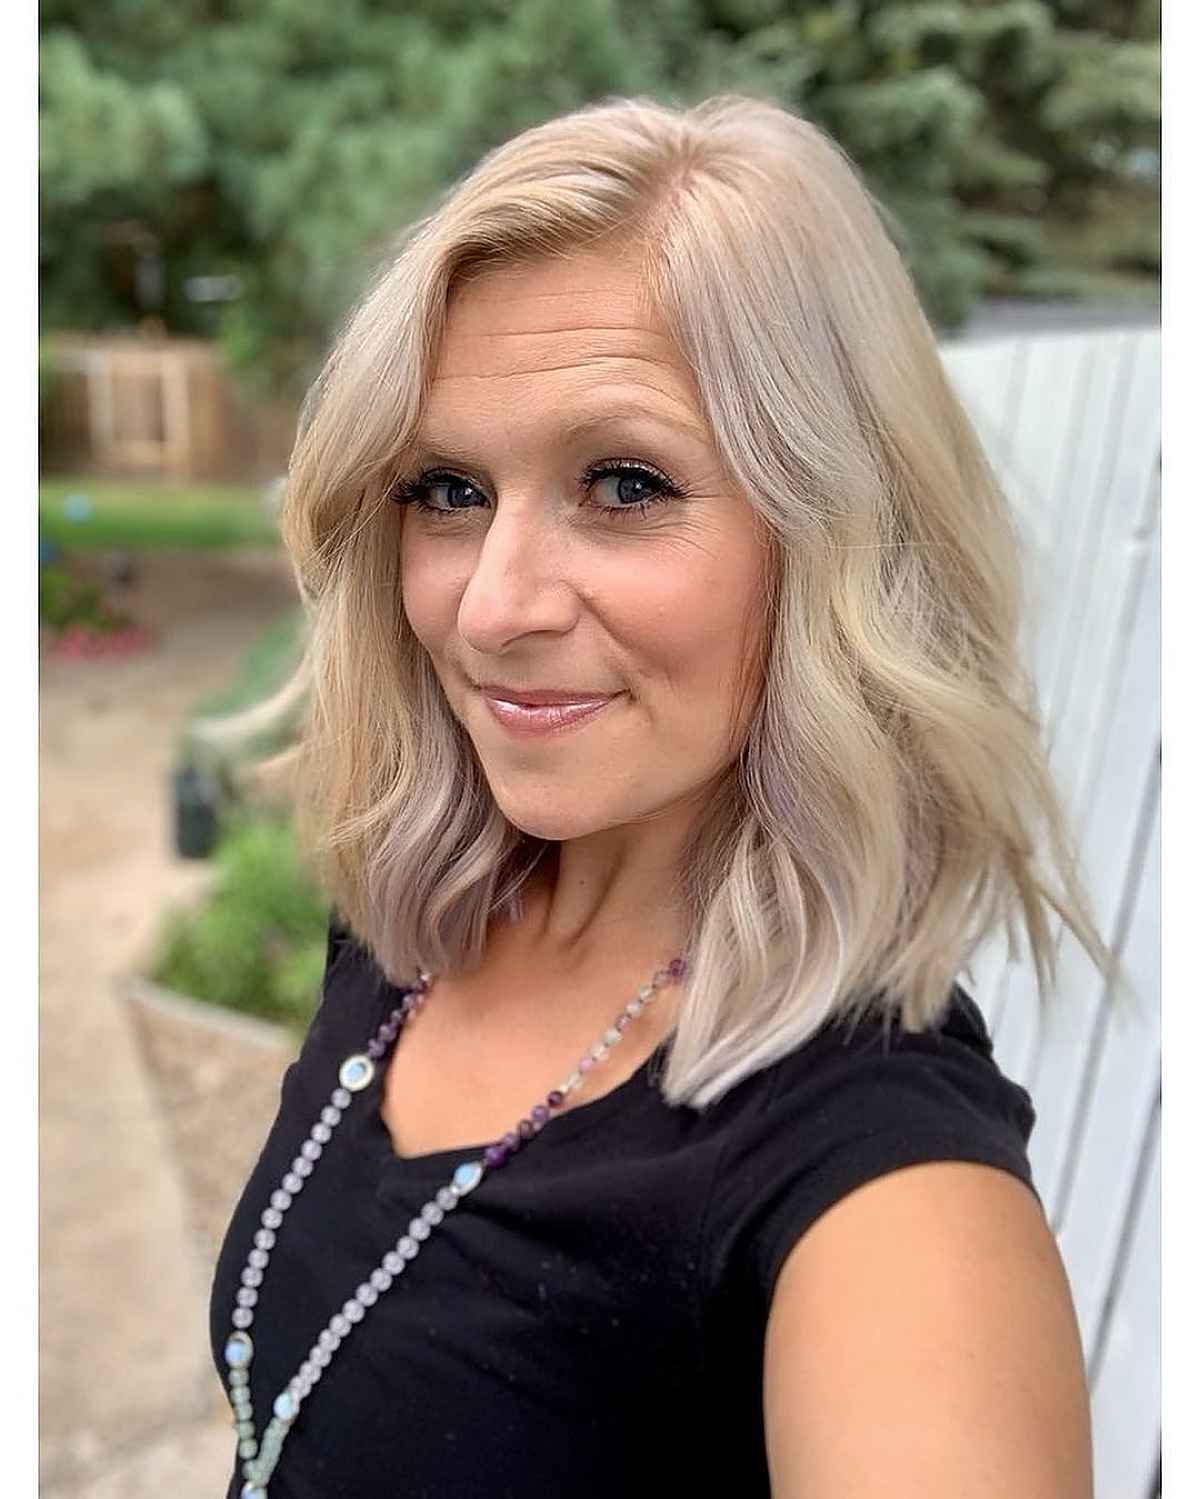 cool and soft blonde highlights hairstyle for ladies over 50